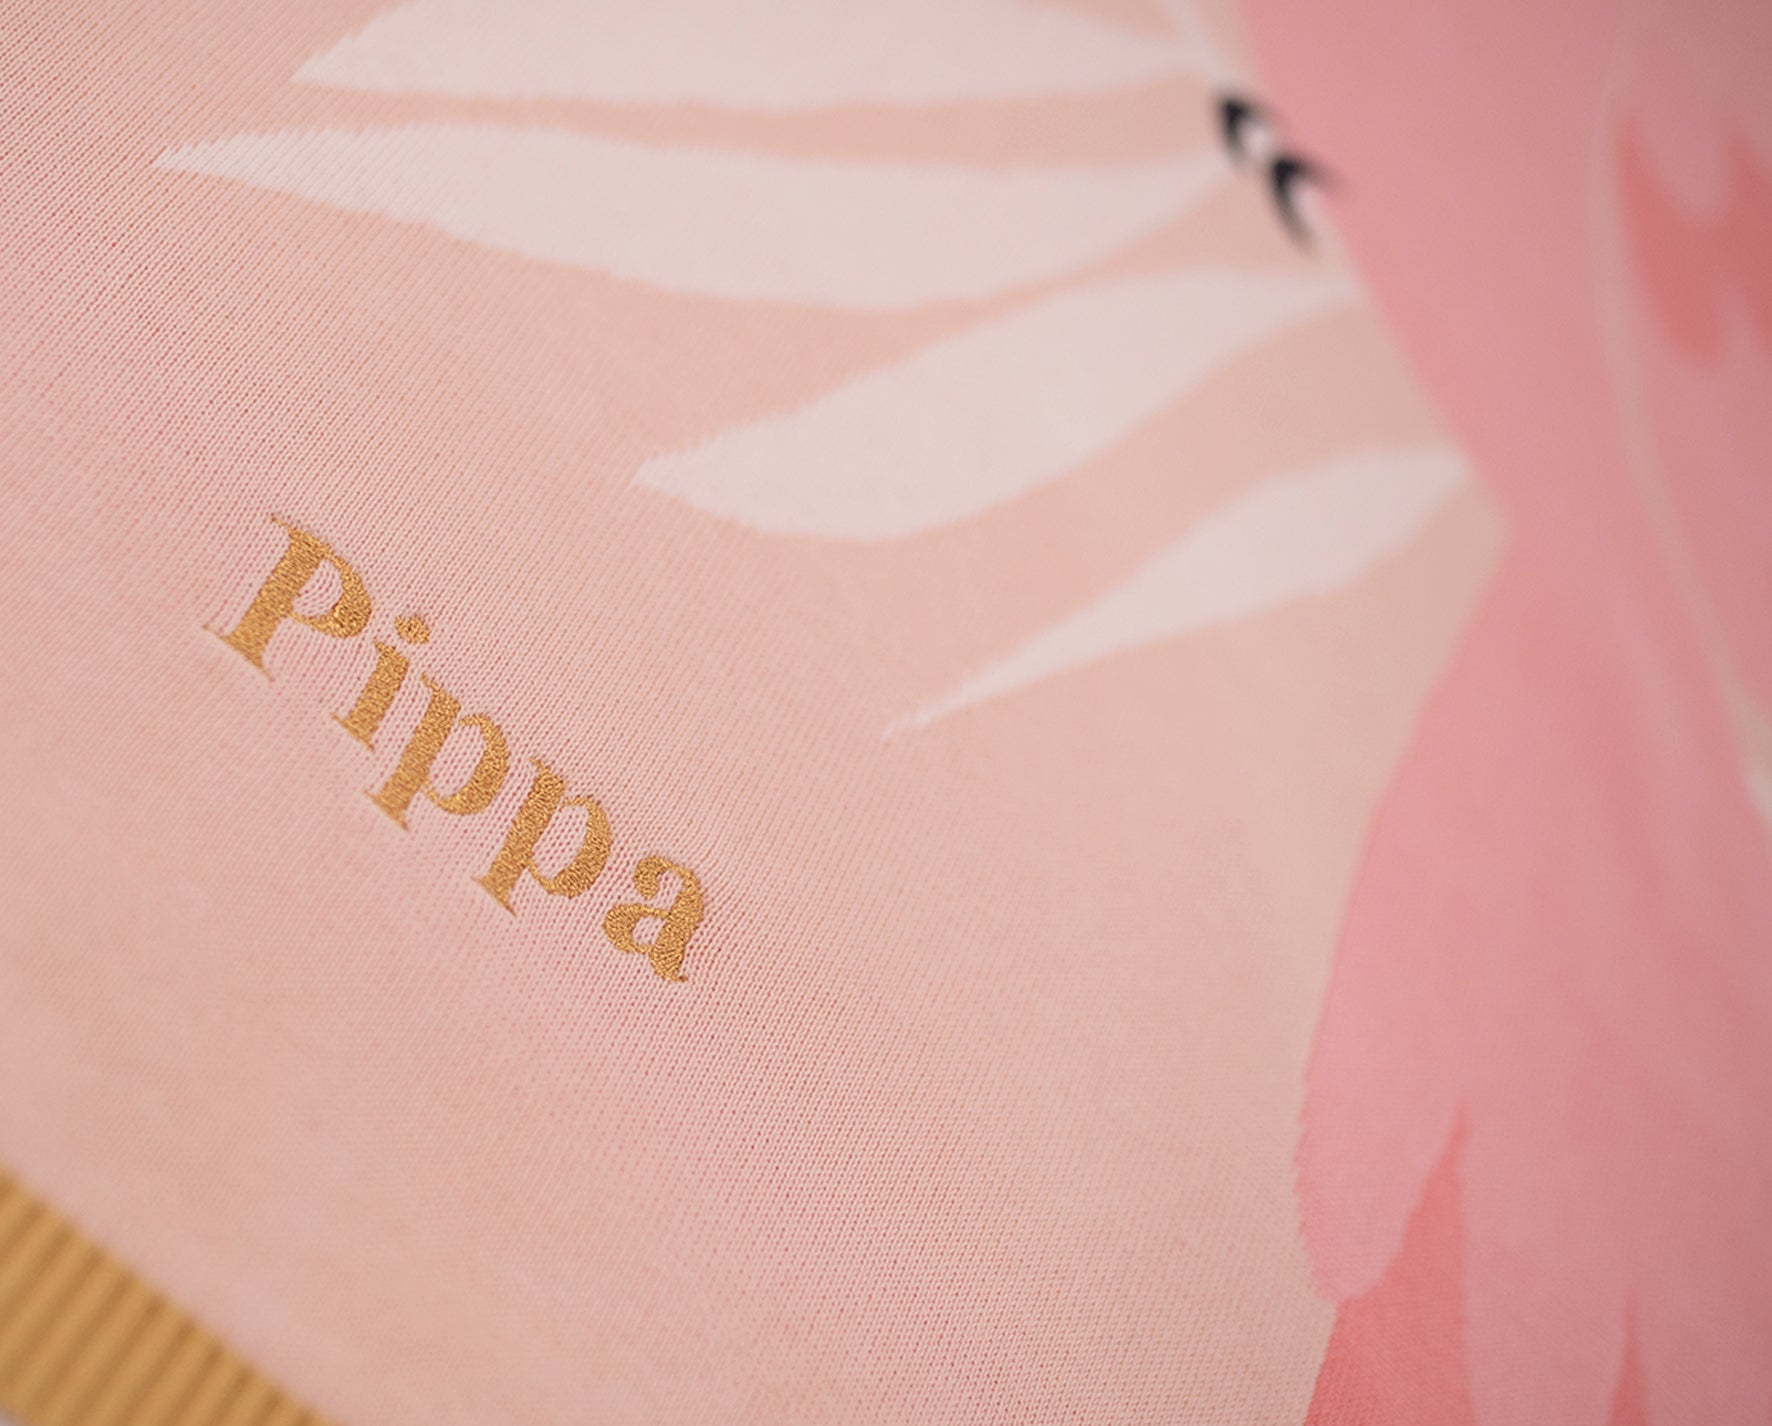 Personalised Baby Blanket - Pippa Parrot